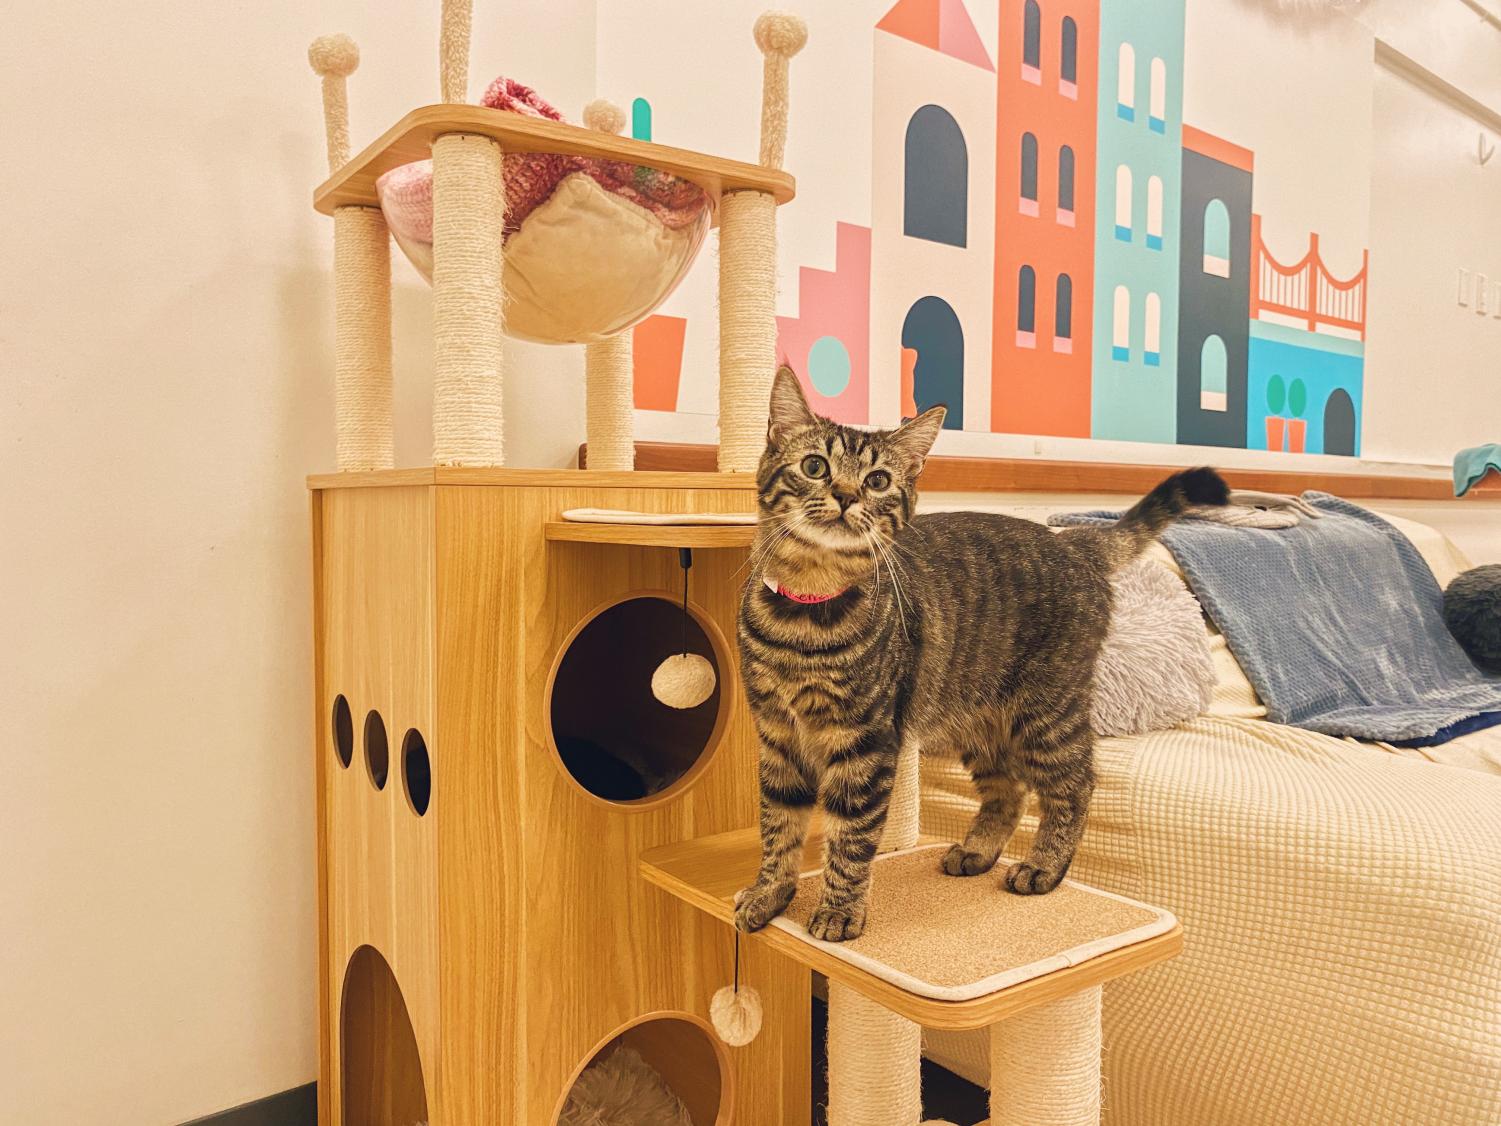 Mini+Cat+Town+strives+for+the+purr-fect+adoption+and+cat+experience